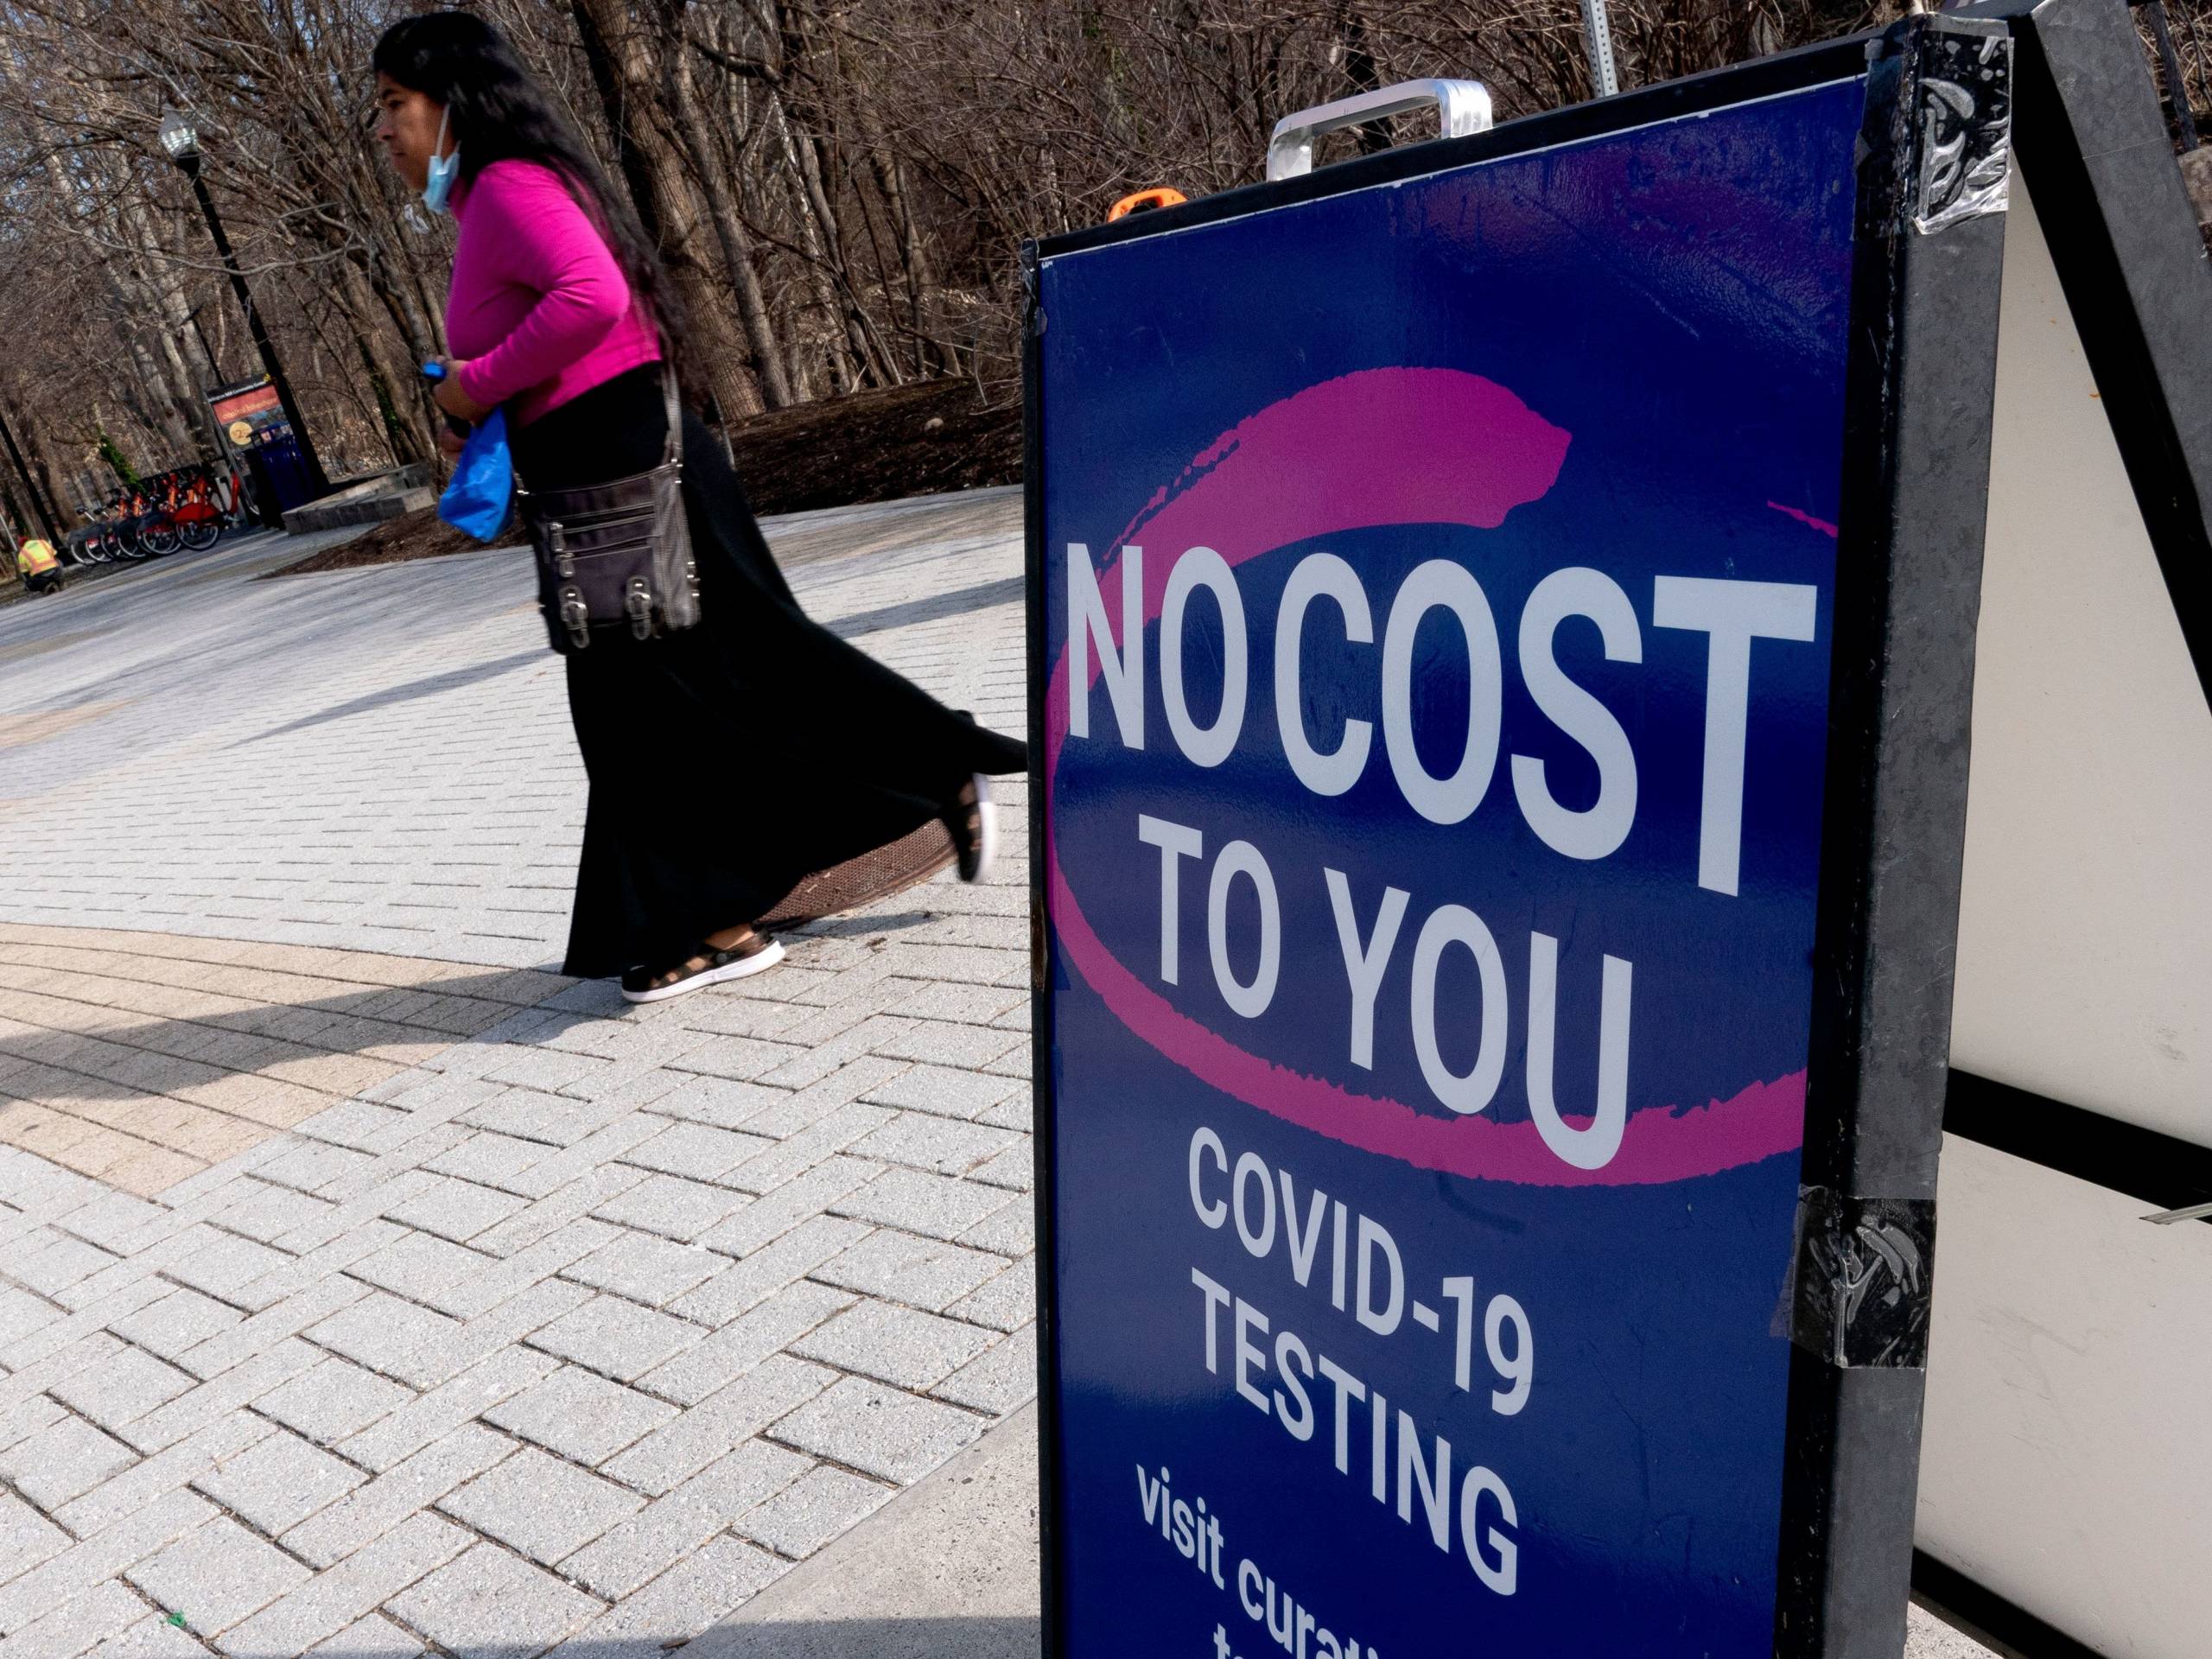 A woman with black hair and dark brown skin, wearing a black skirt and bright pink sweater walks across a stone plaza in the background. In the foreground is a blue sign saying 